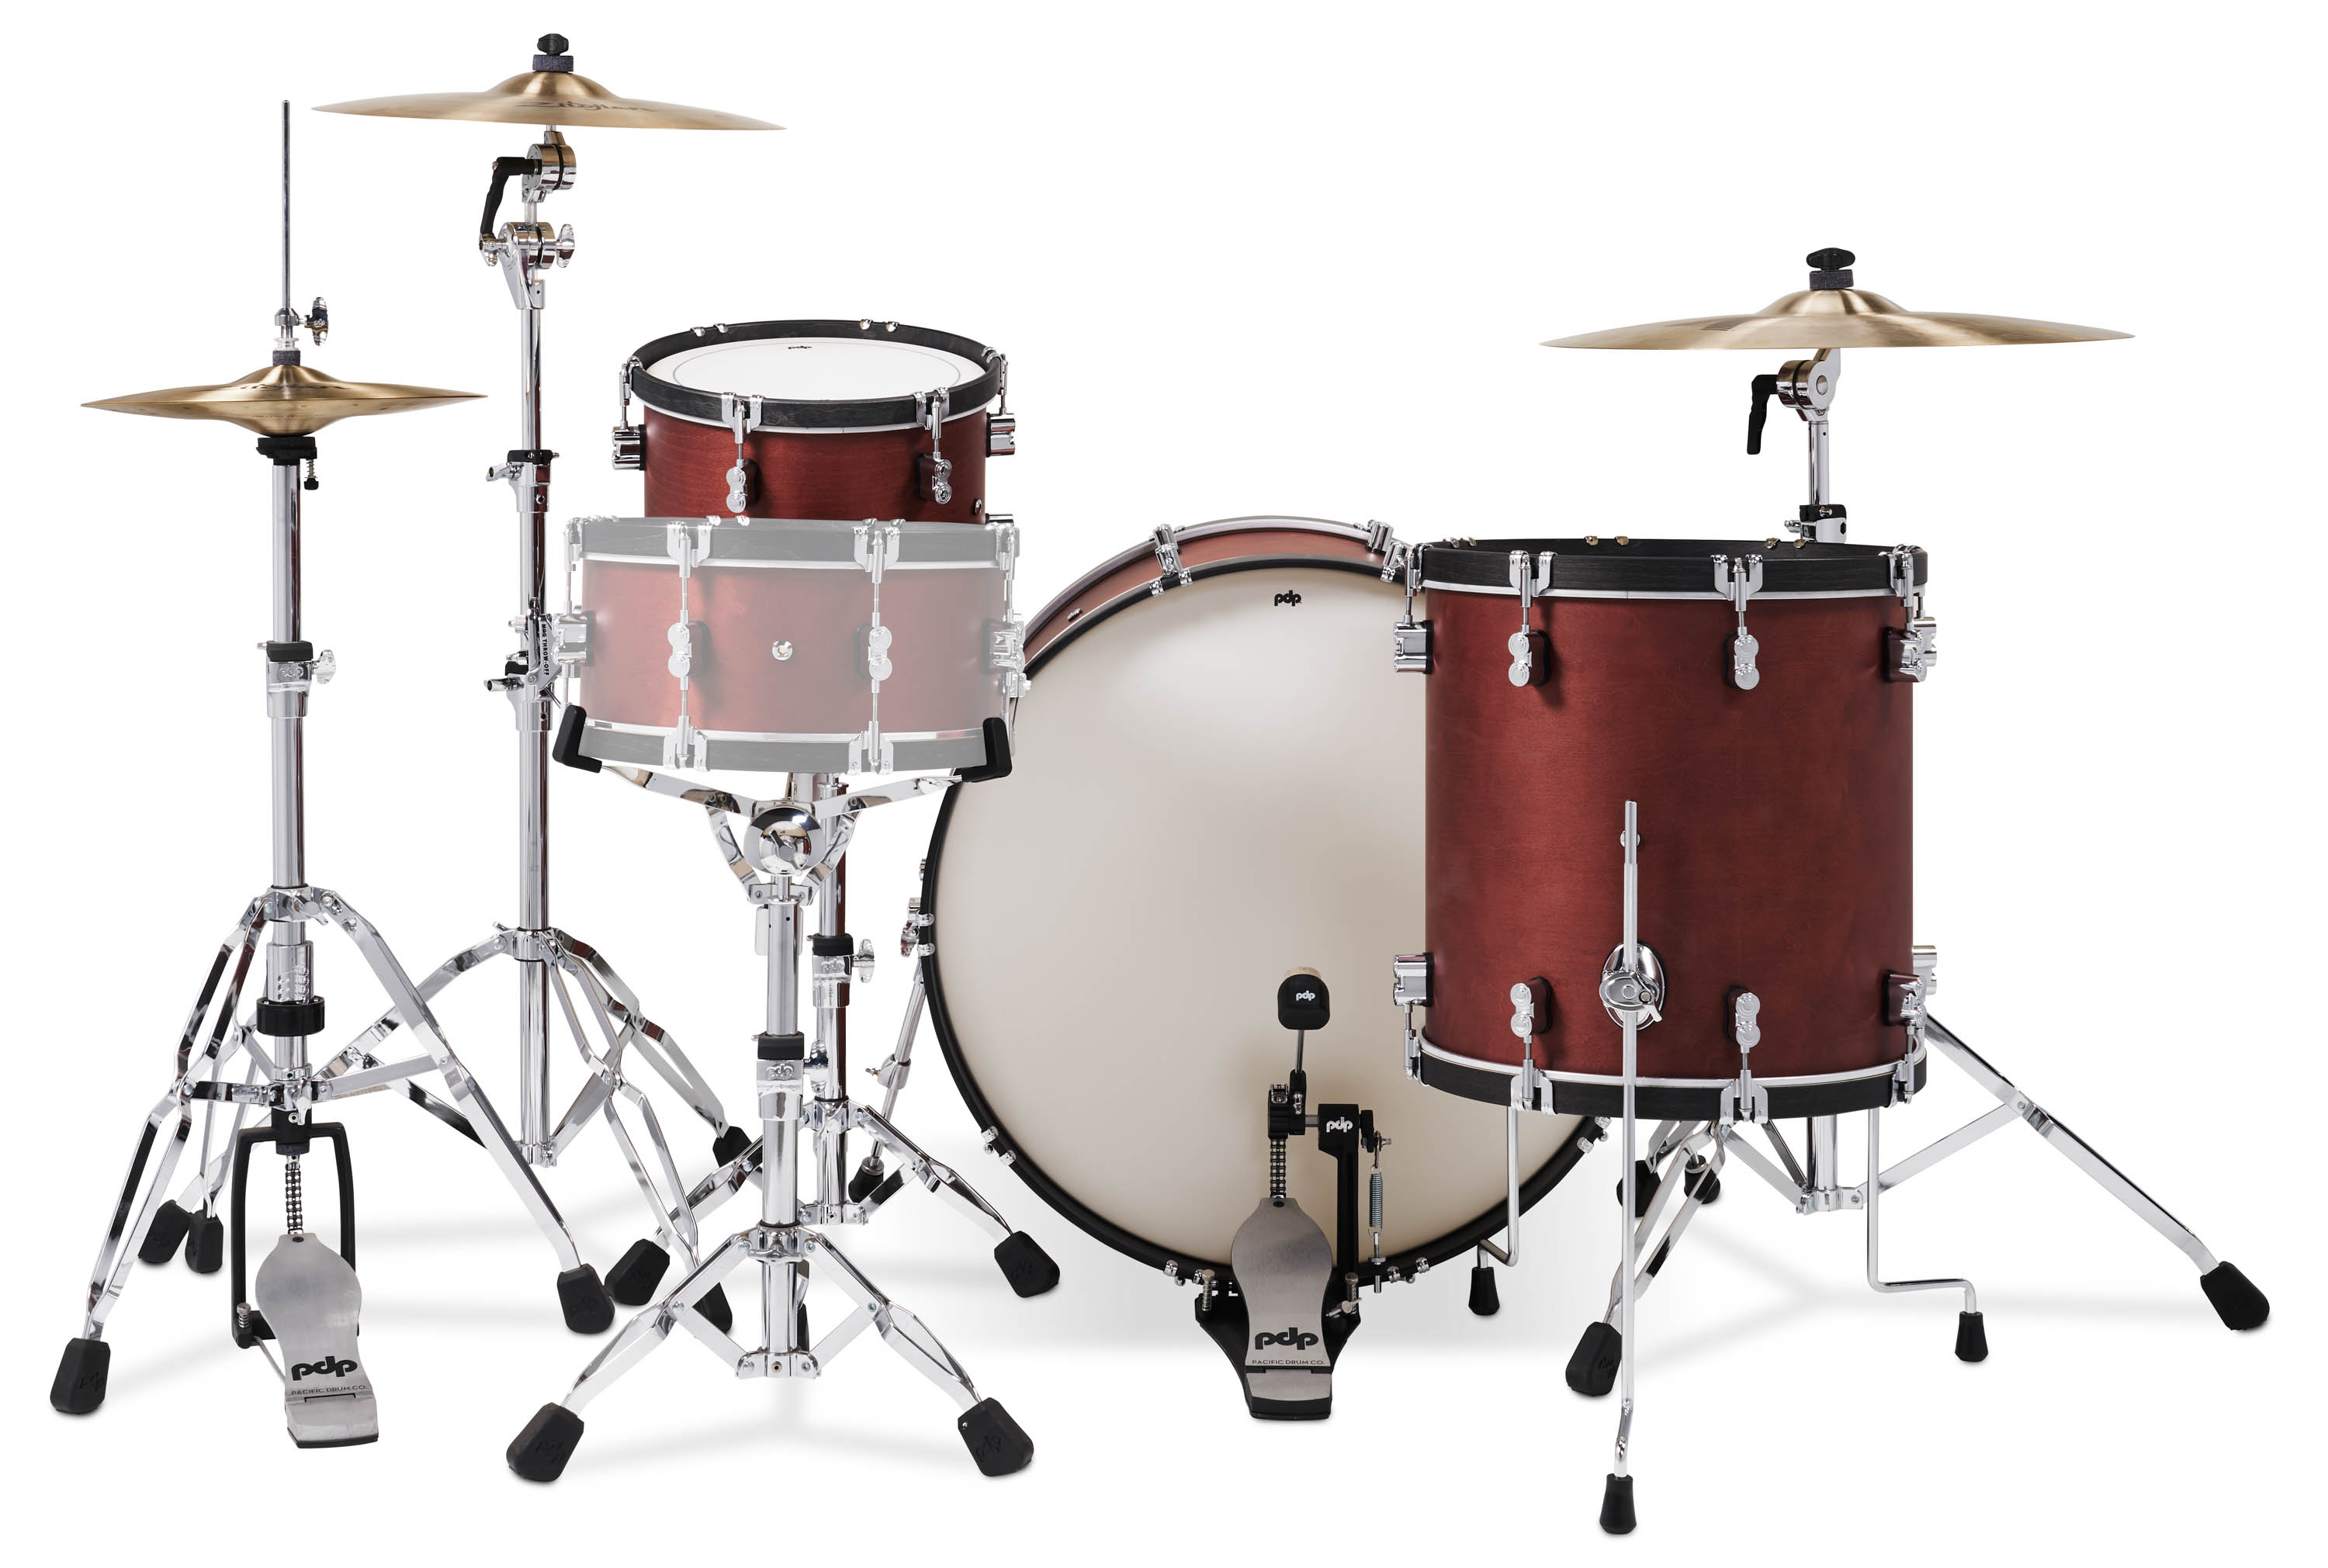 PDP Concept Classic Series 3-Piece Maple Shell Pack, Ox Blood with Ebony Hoops and Chrome Hardware; 9x13, 16x16, 14x26